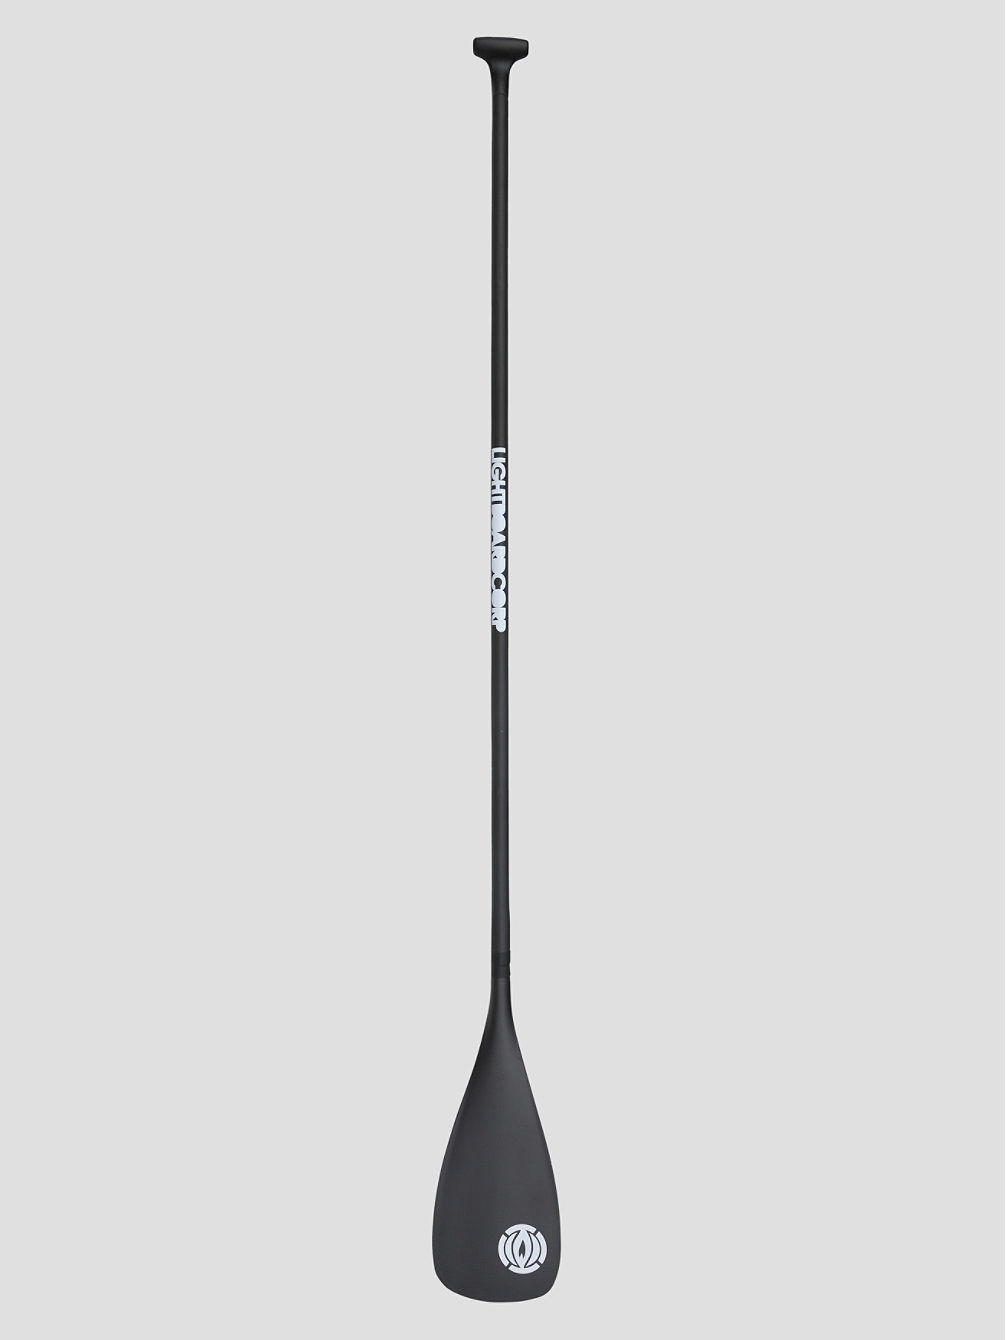 Endurance Race Small All Carbon Fixed Pagaia SUP